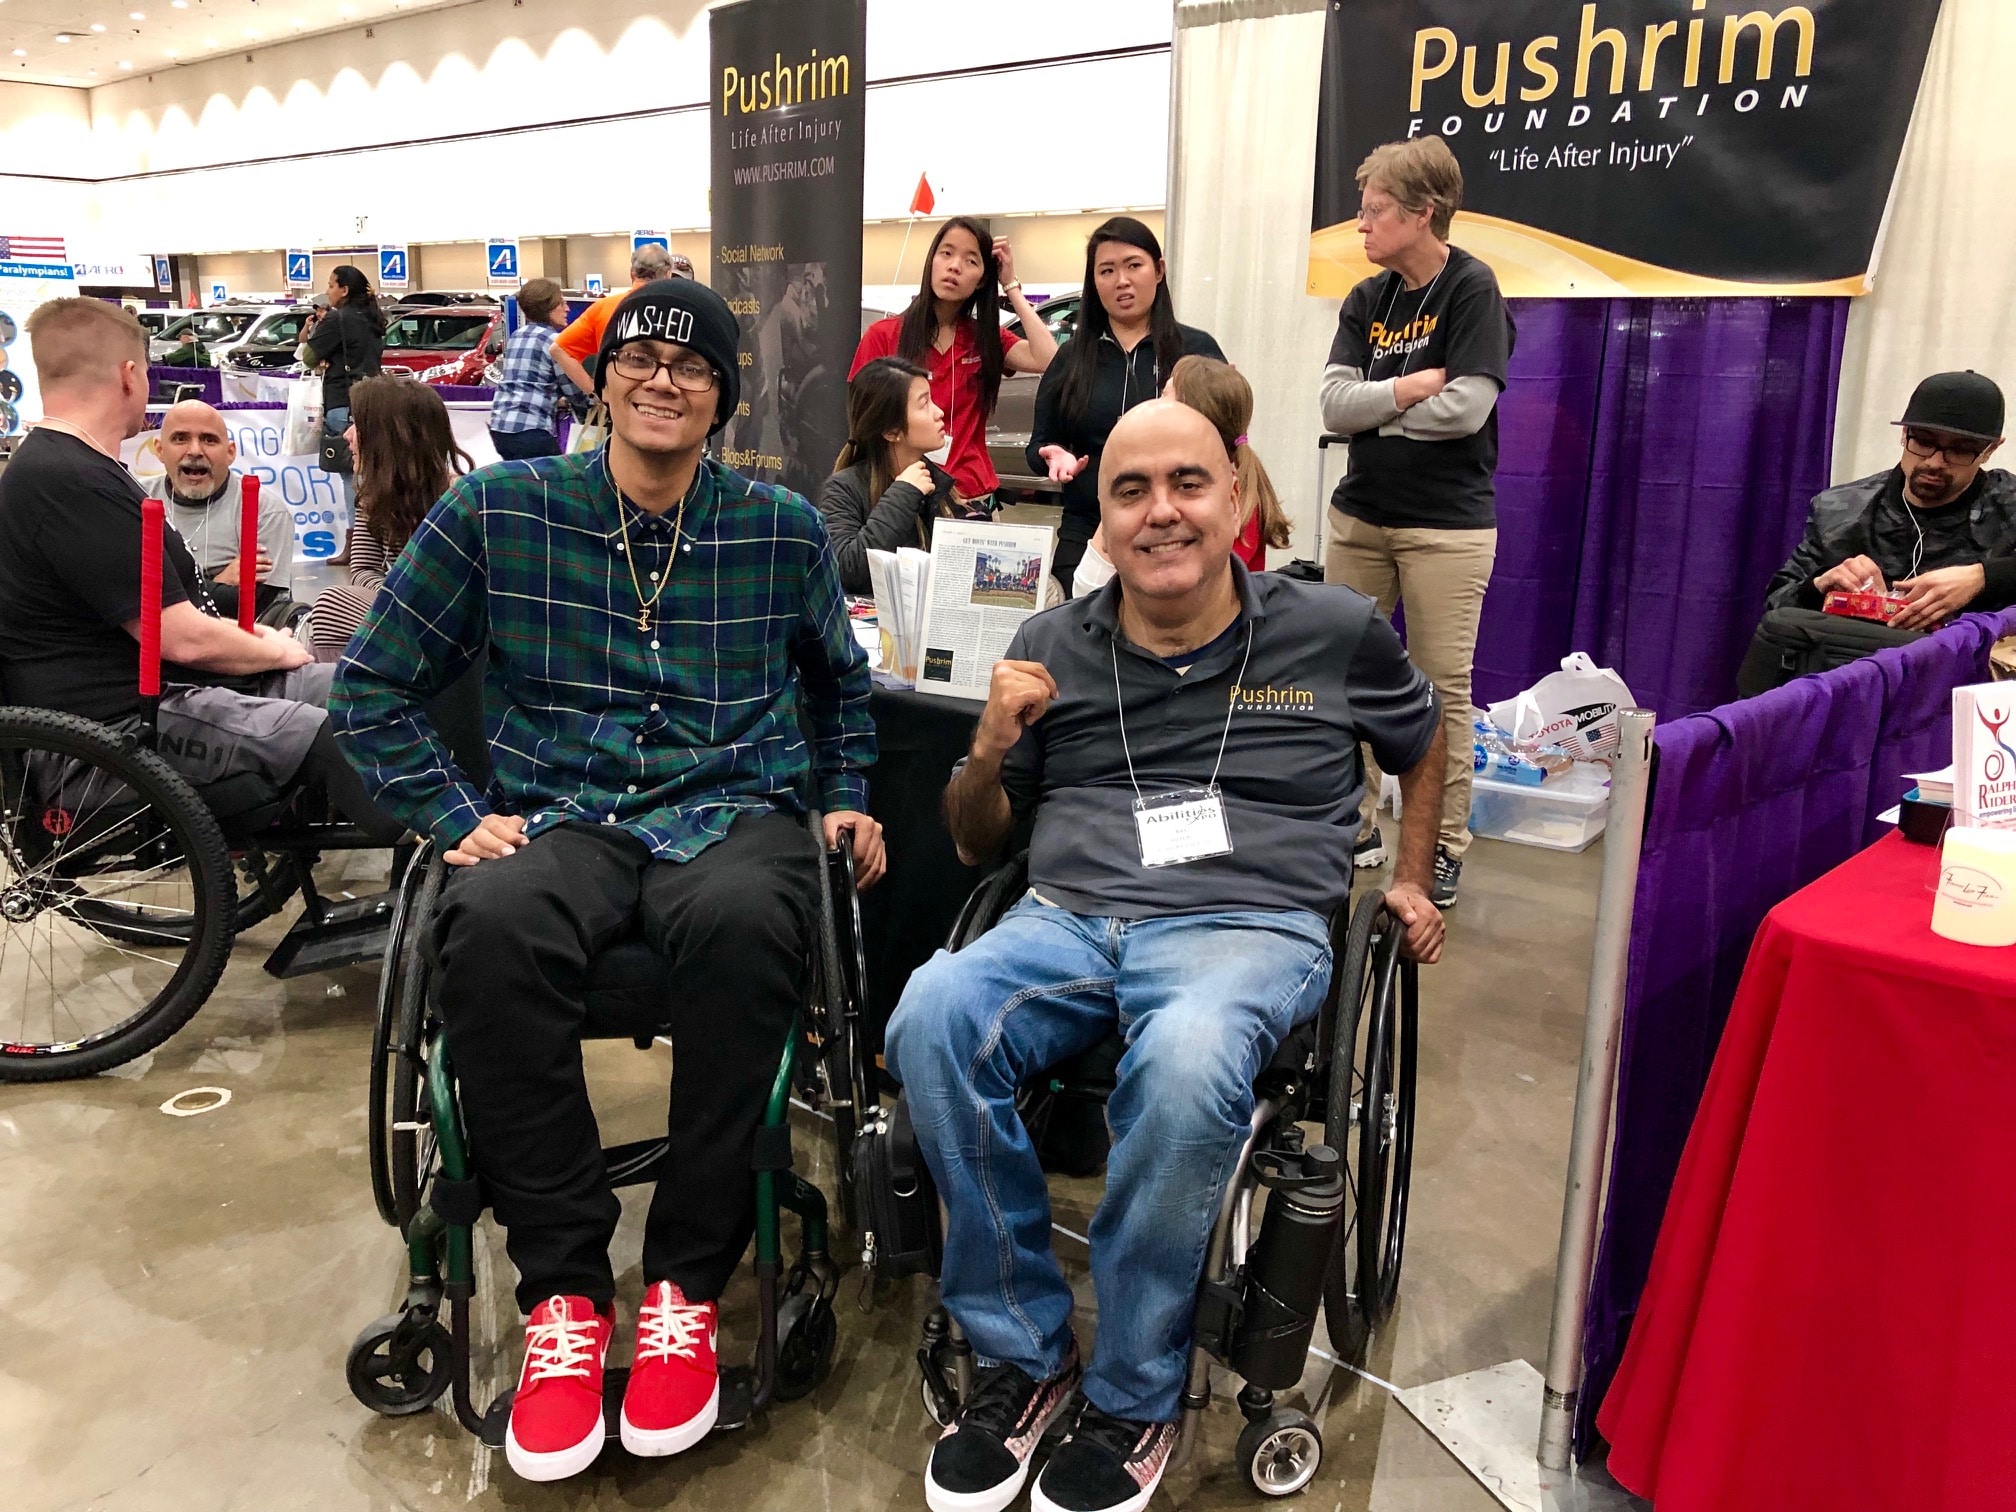 A young main in a wheelchair next to Ray Pizarro in his wheelchair at an expo